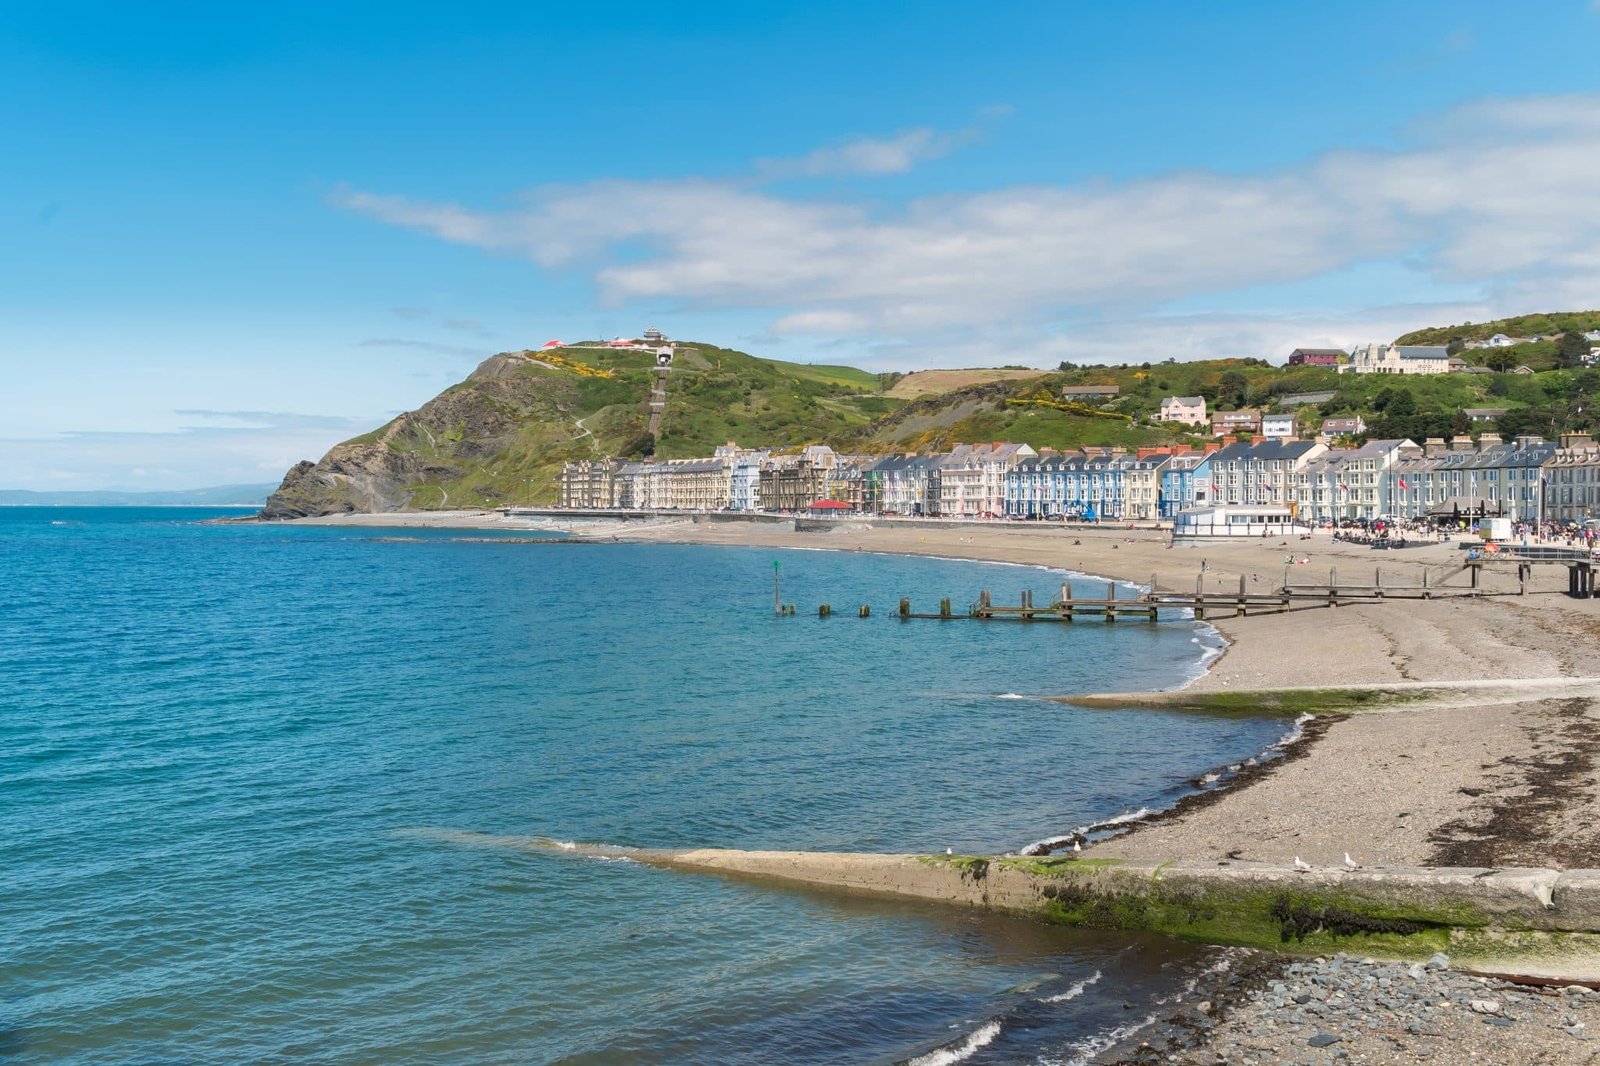 The beach at Aberystwyth in Wales